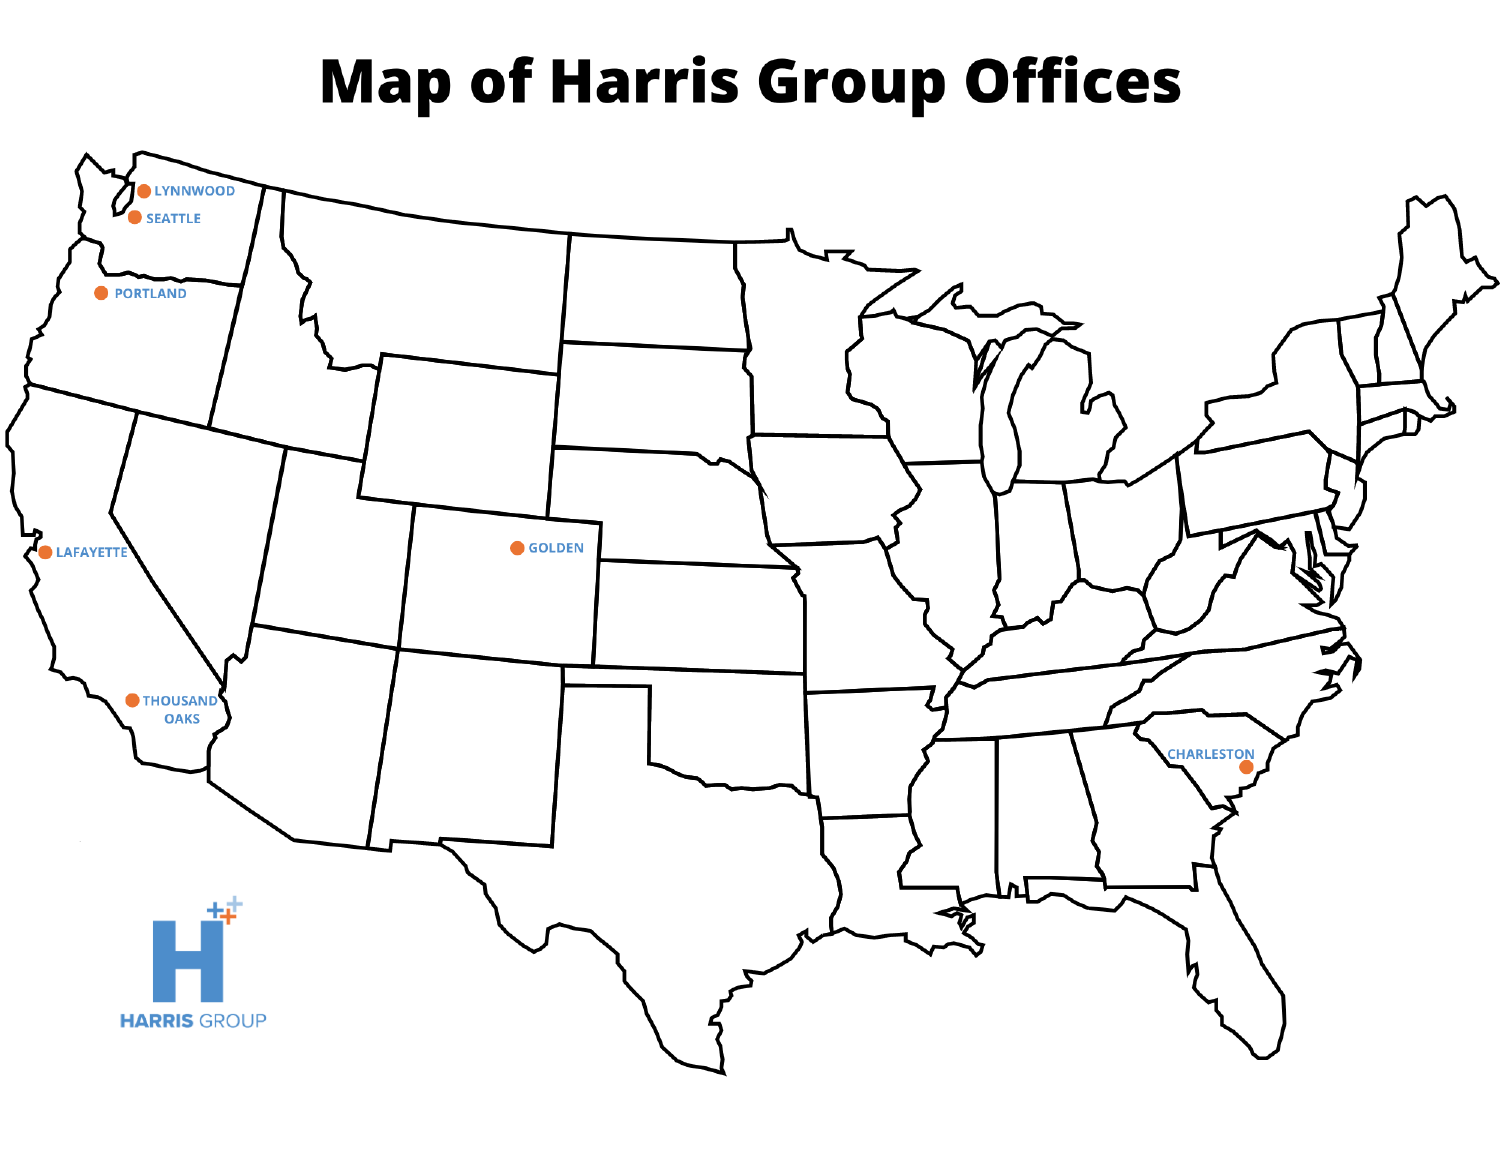 Map of Harris Group locations